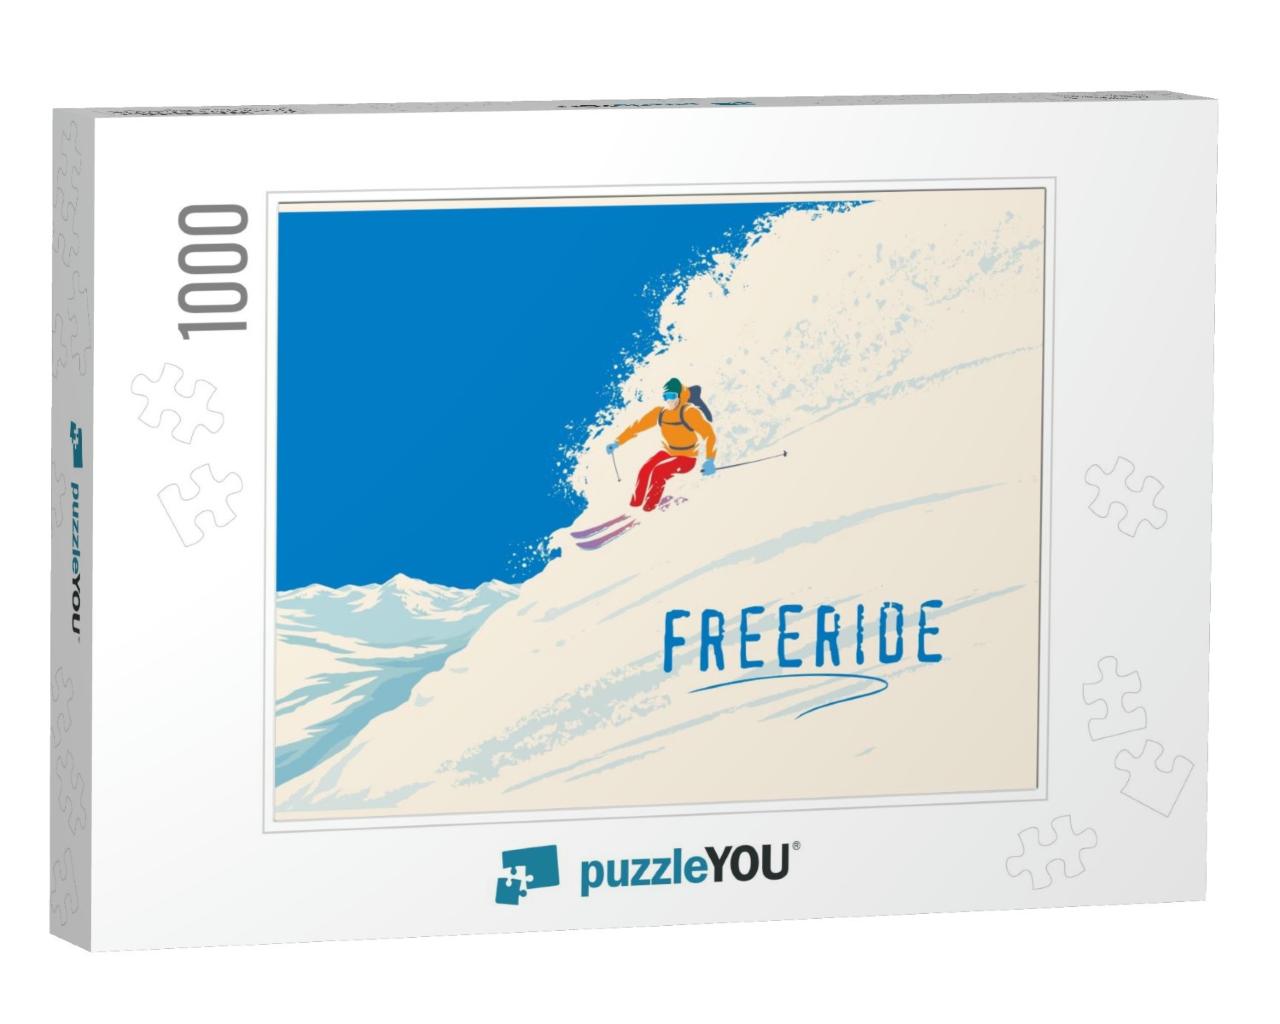 Skier Freerides Riding Down the Mountainside on Skis in M... Jigsaw Puzzle with 1000 pieces